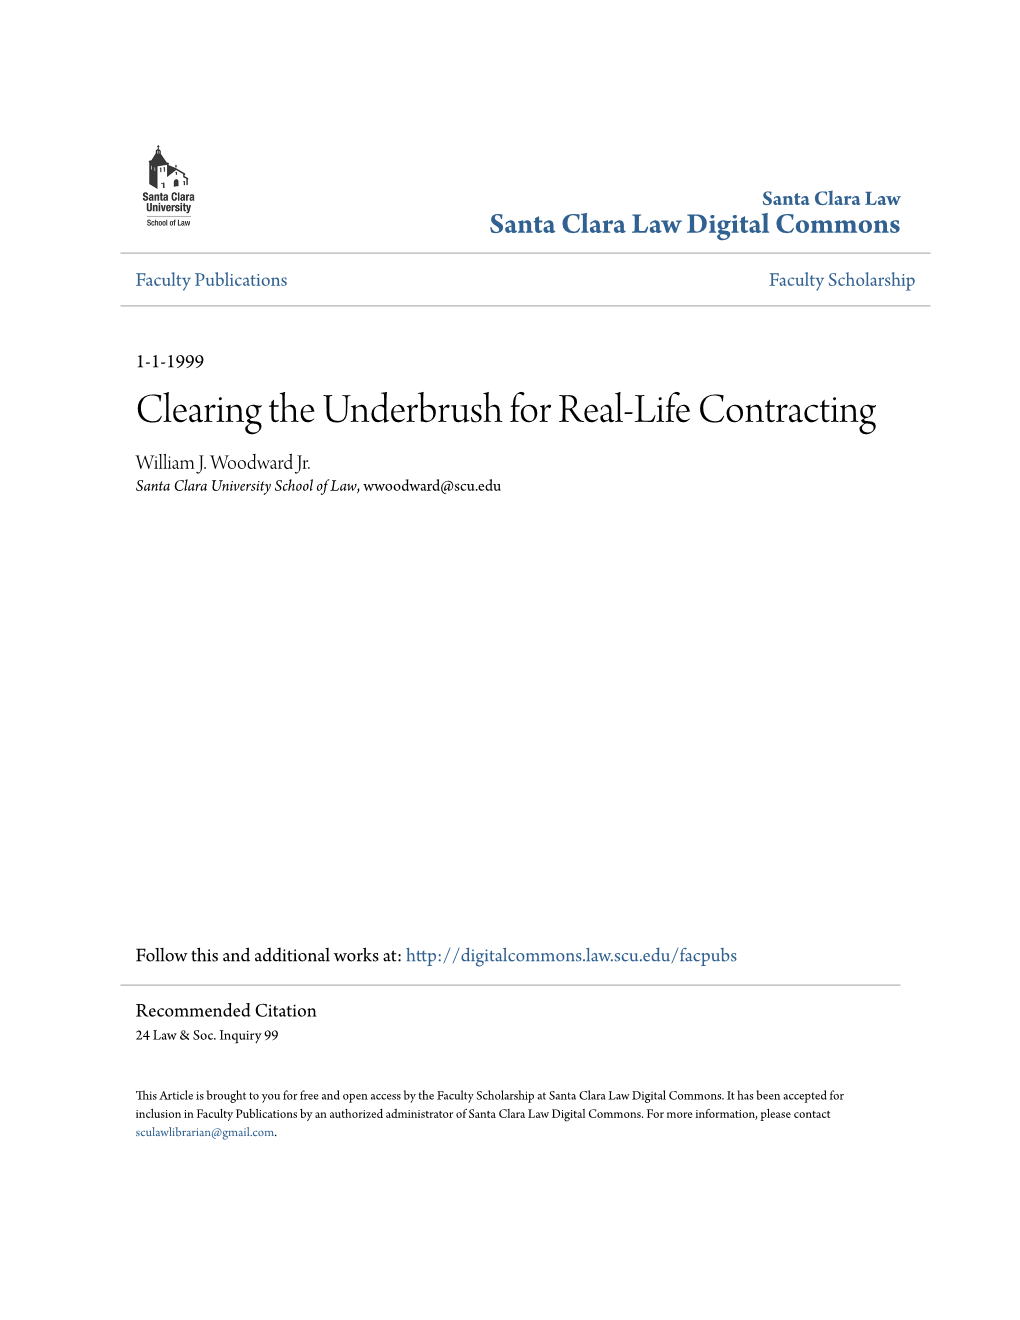 Clearing the Underbrush for Real-Life Contracting William J